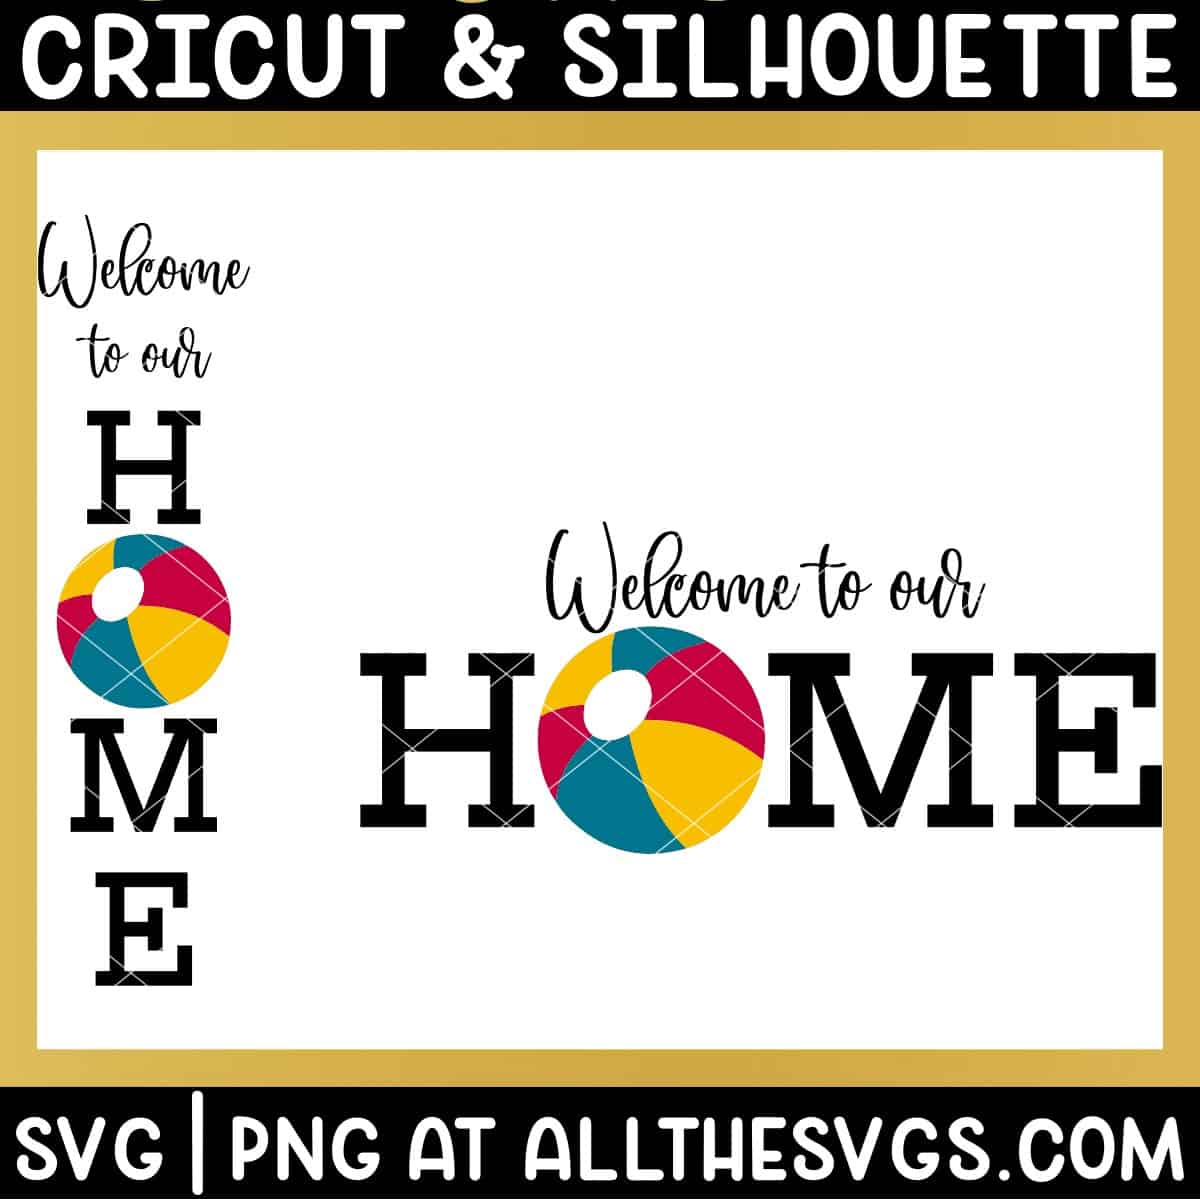 welcome to our home sign svg file with beach ball.